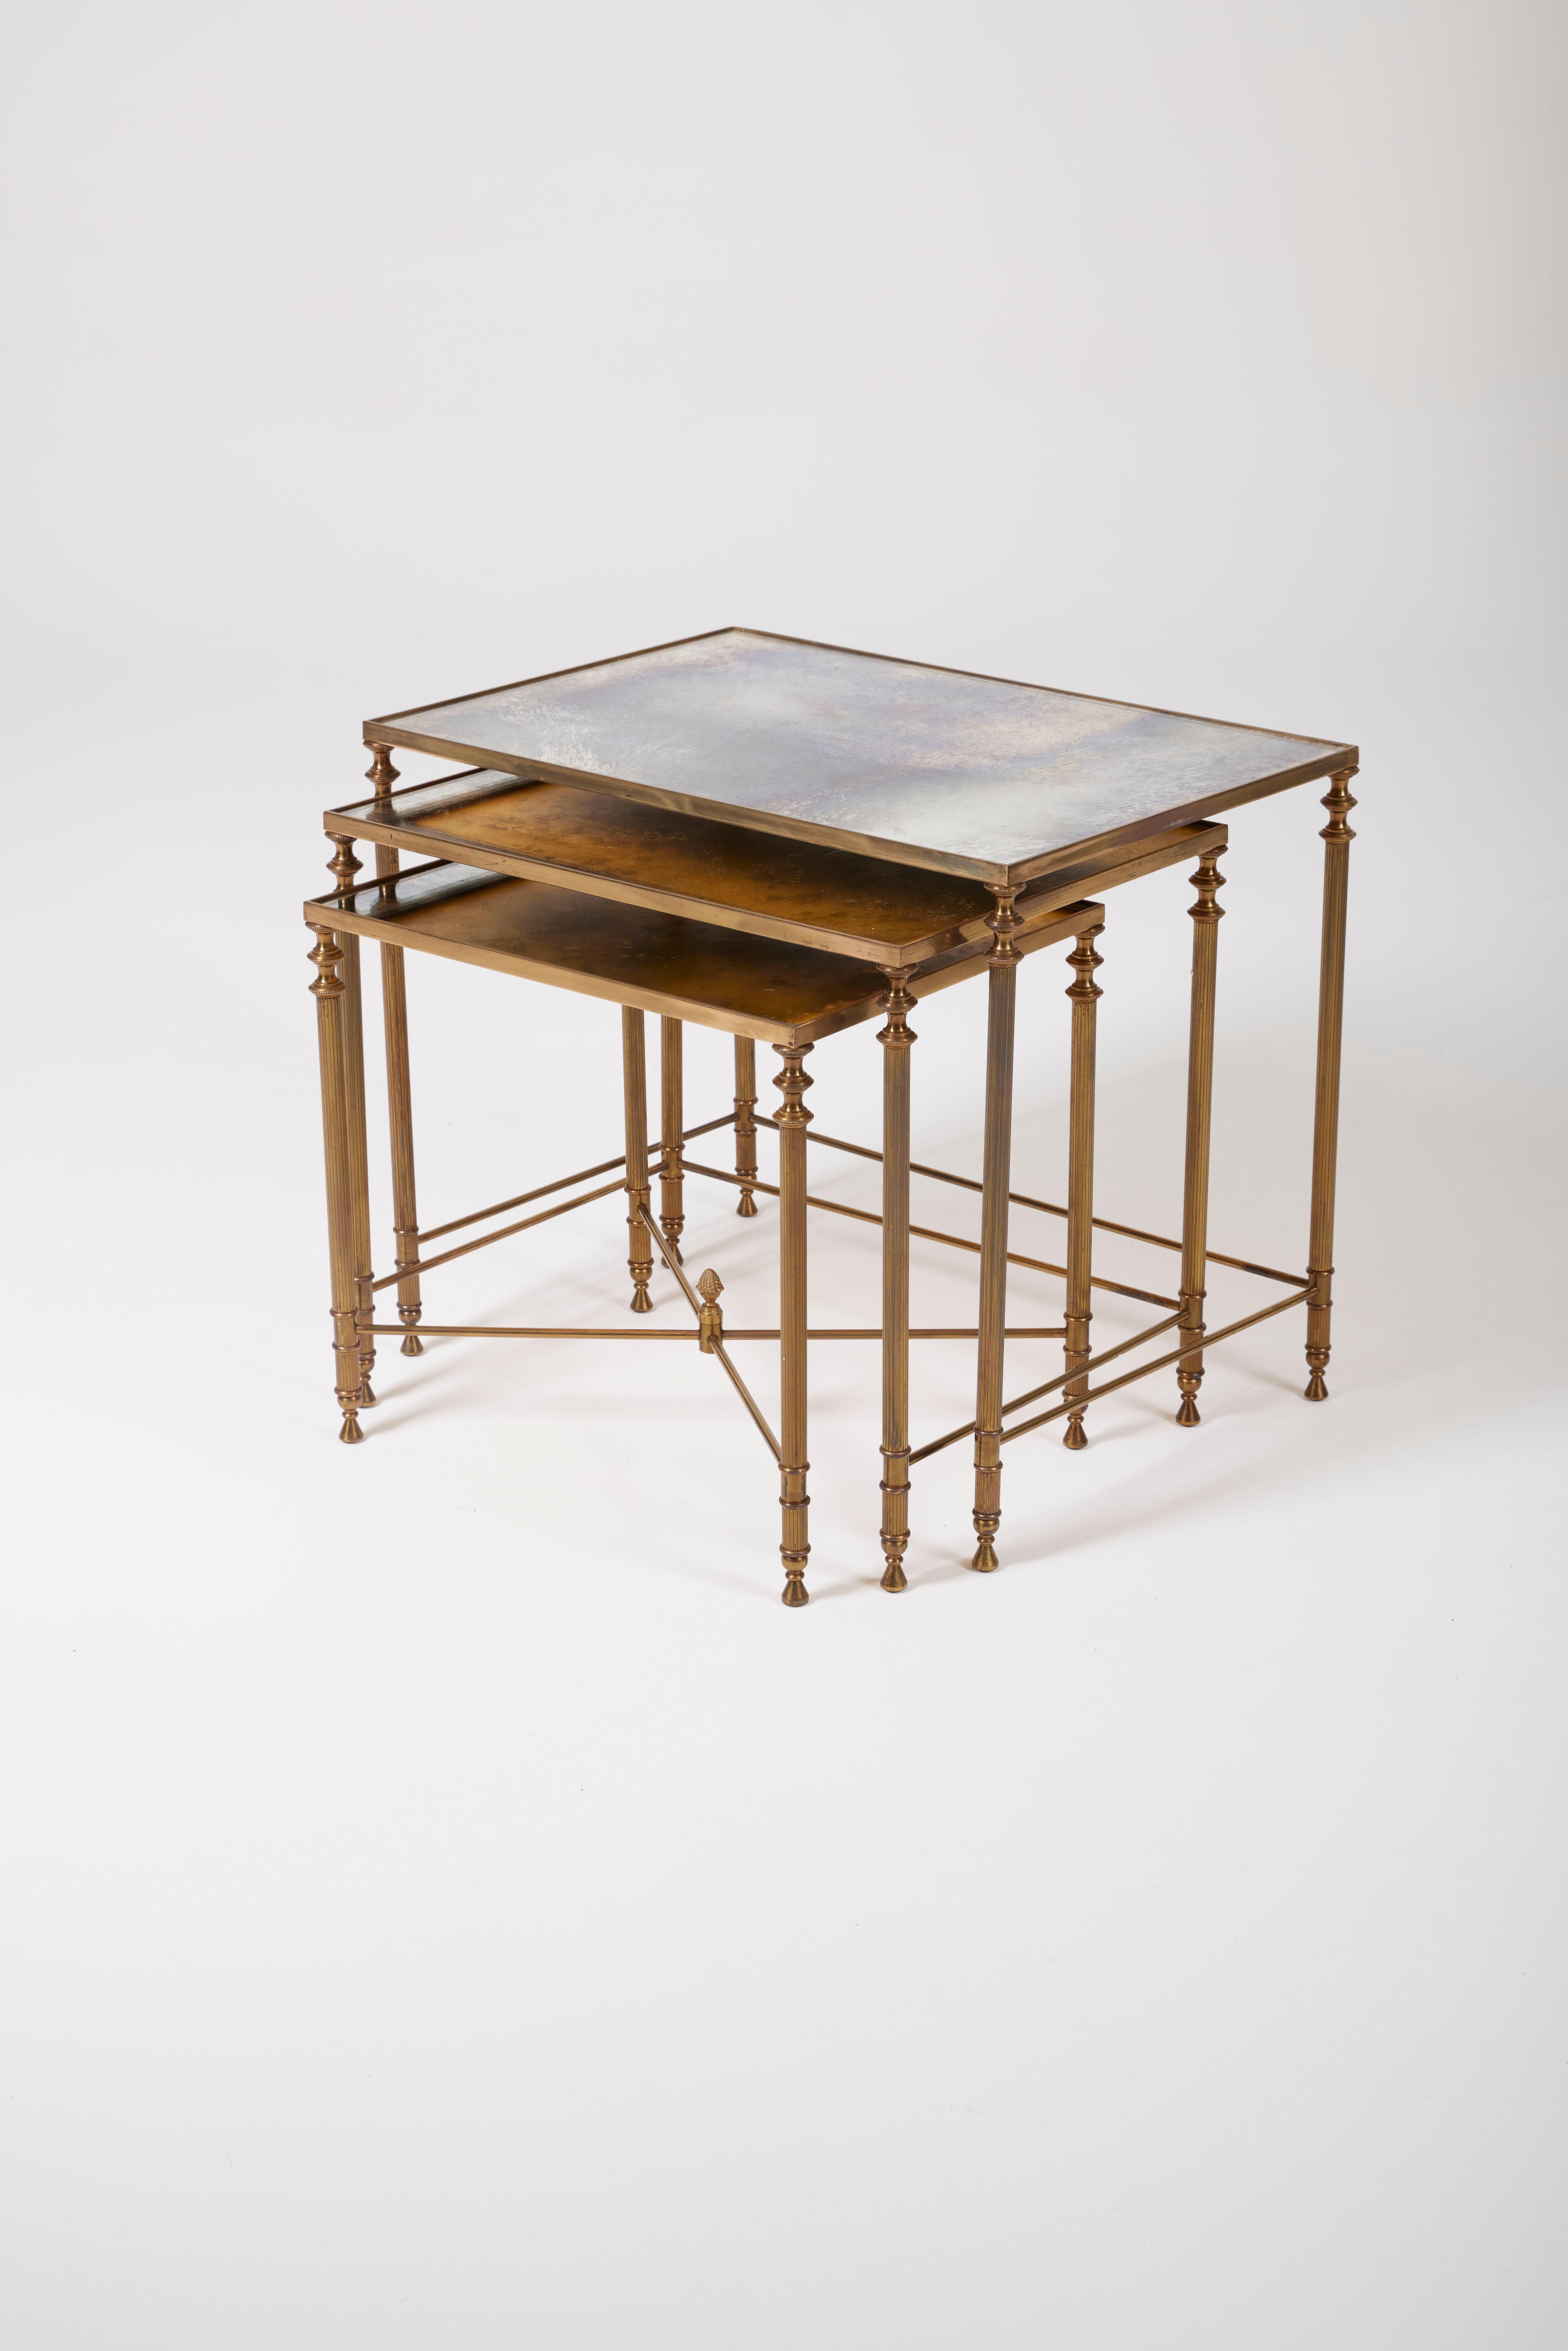 Set of 3 nesting tables heavily inspired by Maison Baguès. The base is in gilded brass, and the tops are in antiqued mirror. In very good condition.
LP1972